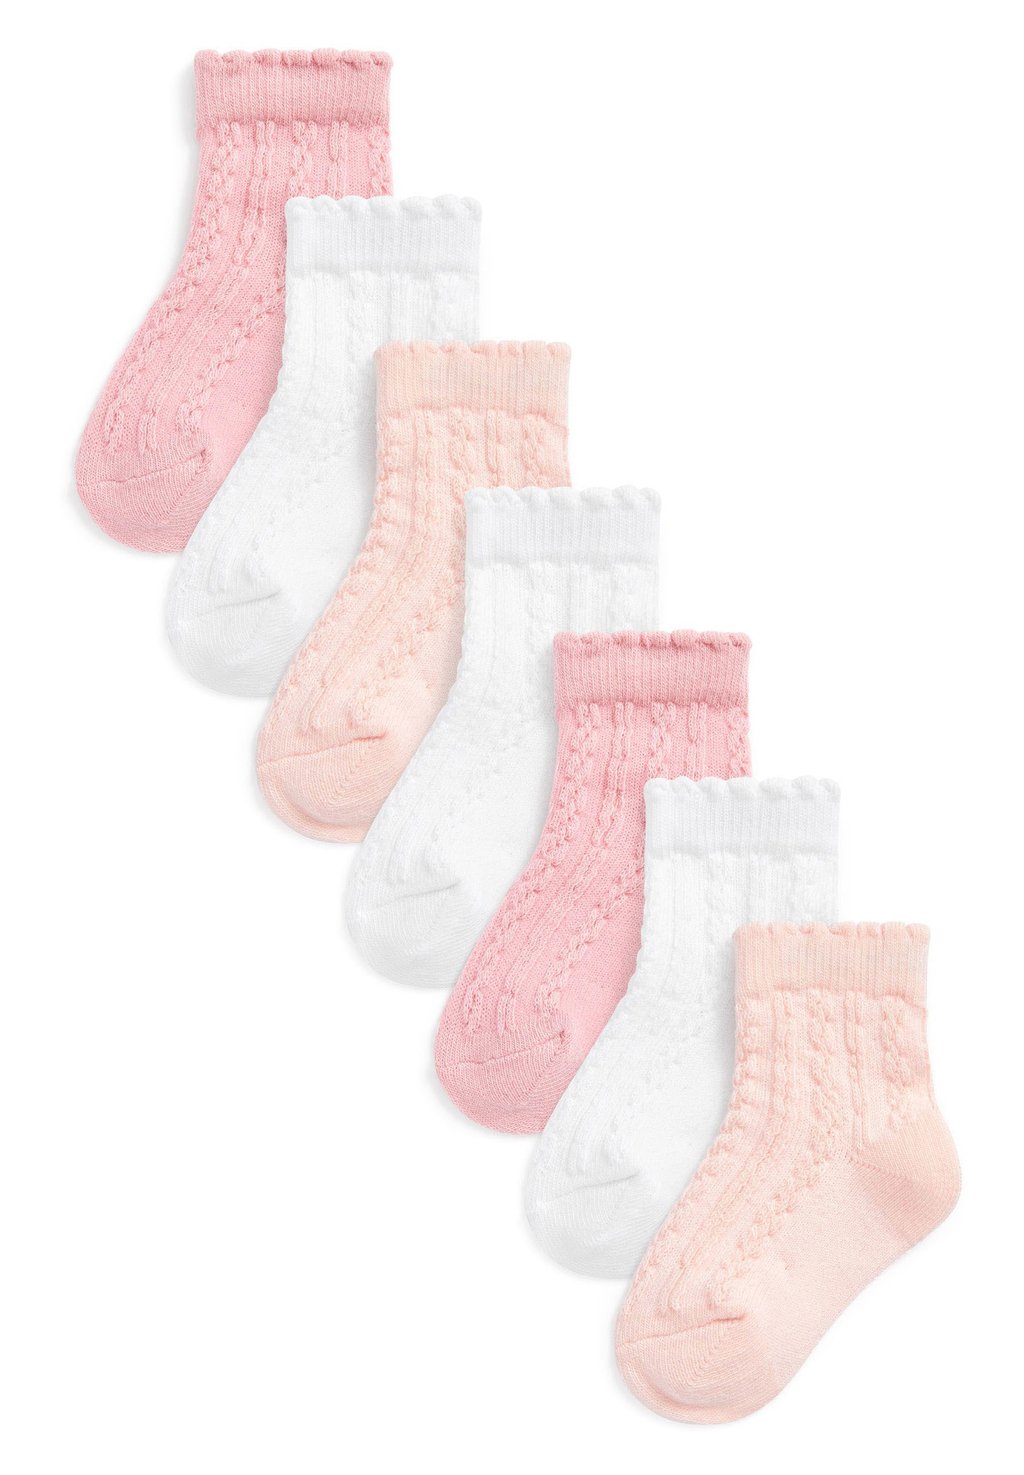 Носки 7 PACK Next, цвет pink/white cable knit носки 7 pack next цвет pink white cable knit